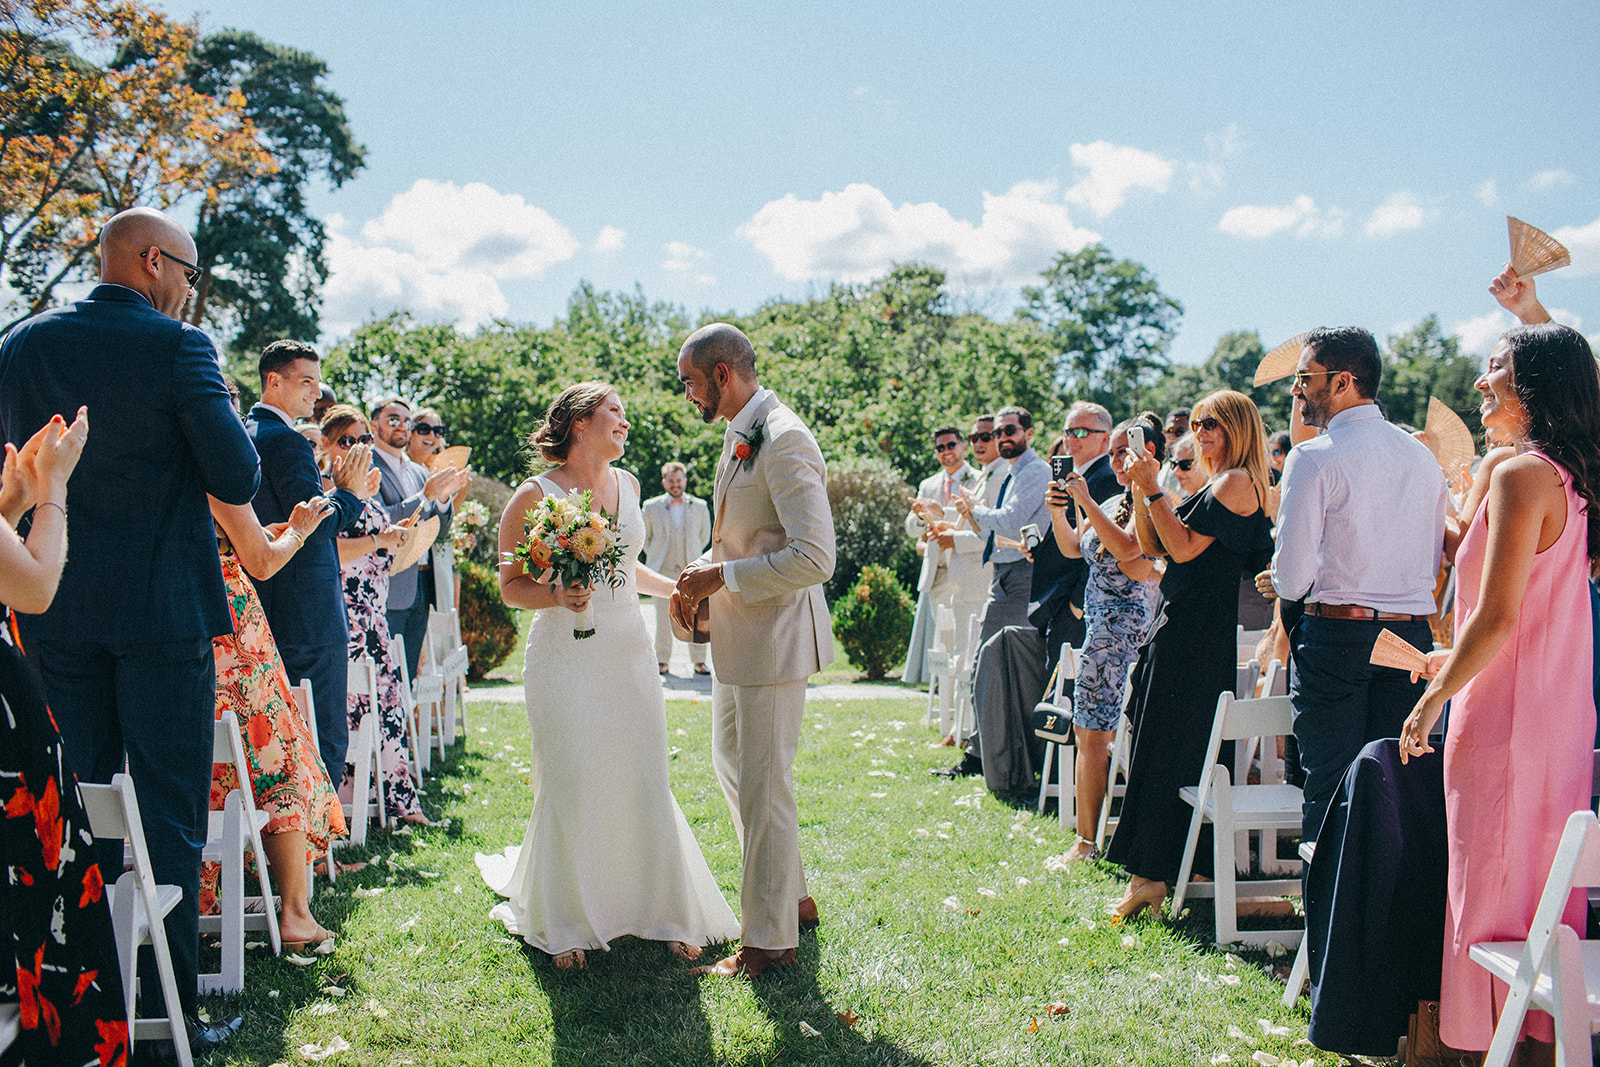 Genuine documentary wedding photos from an outdoor ceremony at Pinecroft Mansion in downtown Cincinnati 